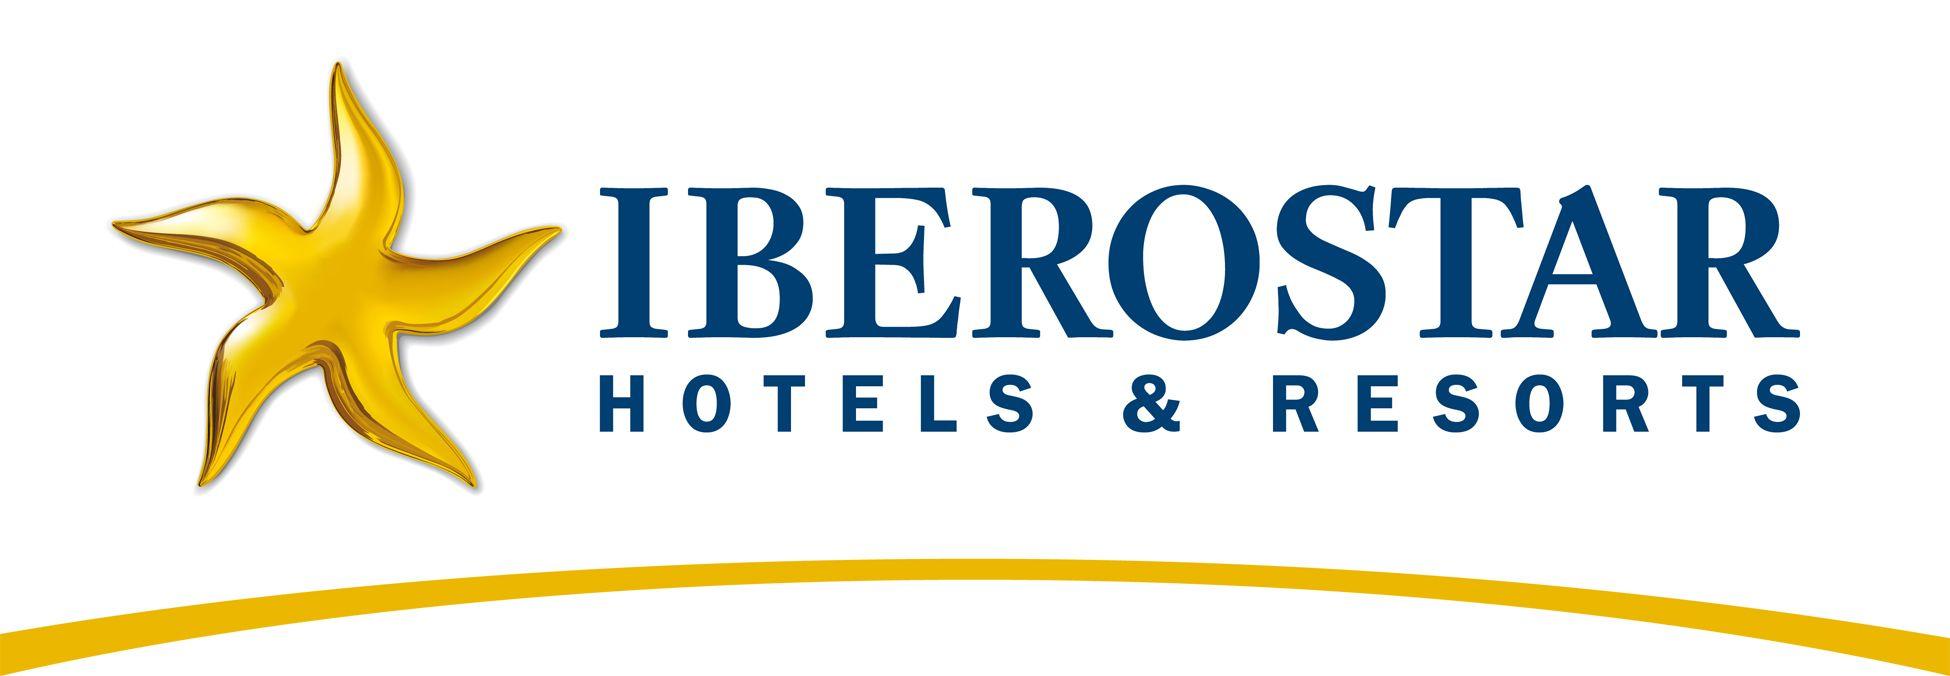 Iberostar Logo - The Gecko Tour and Iberostar Hotels & Resorts join forces for Ernie ...